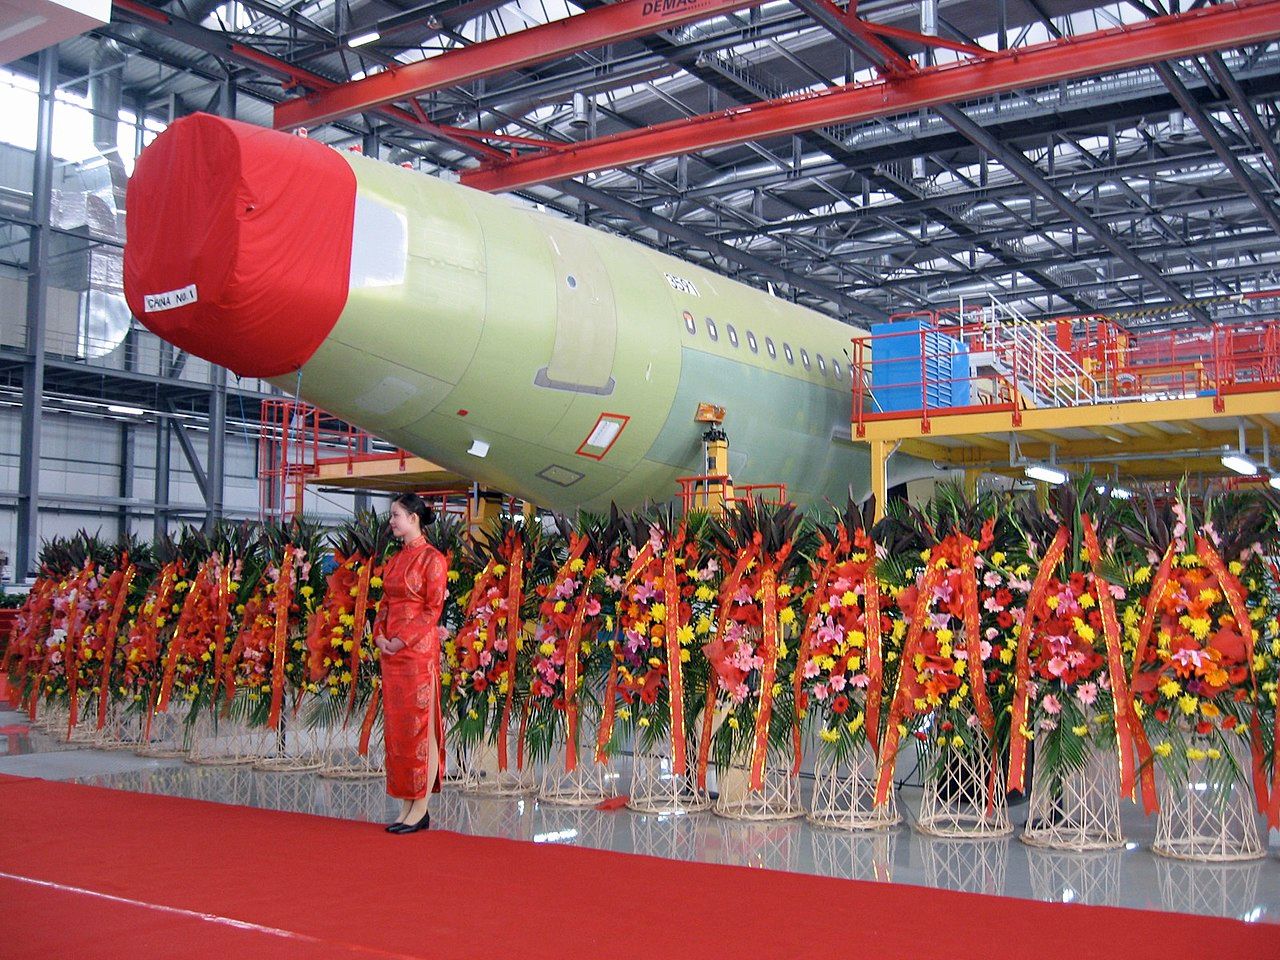 An Airbus being produced at the Tianjin line.